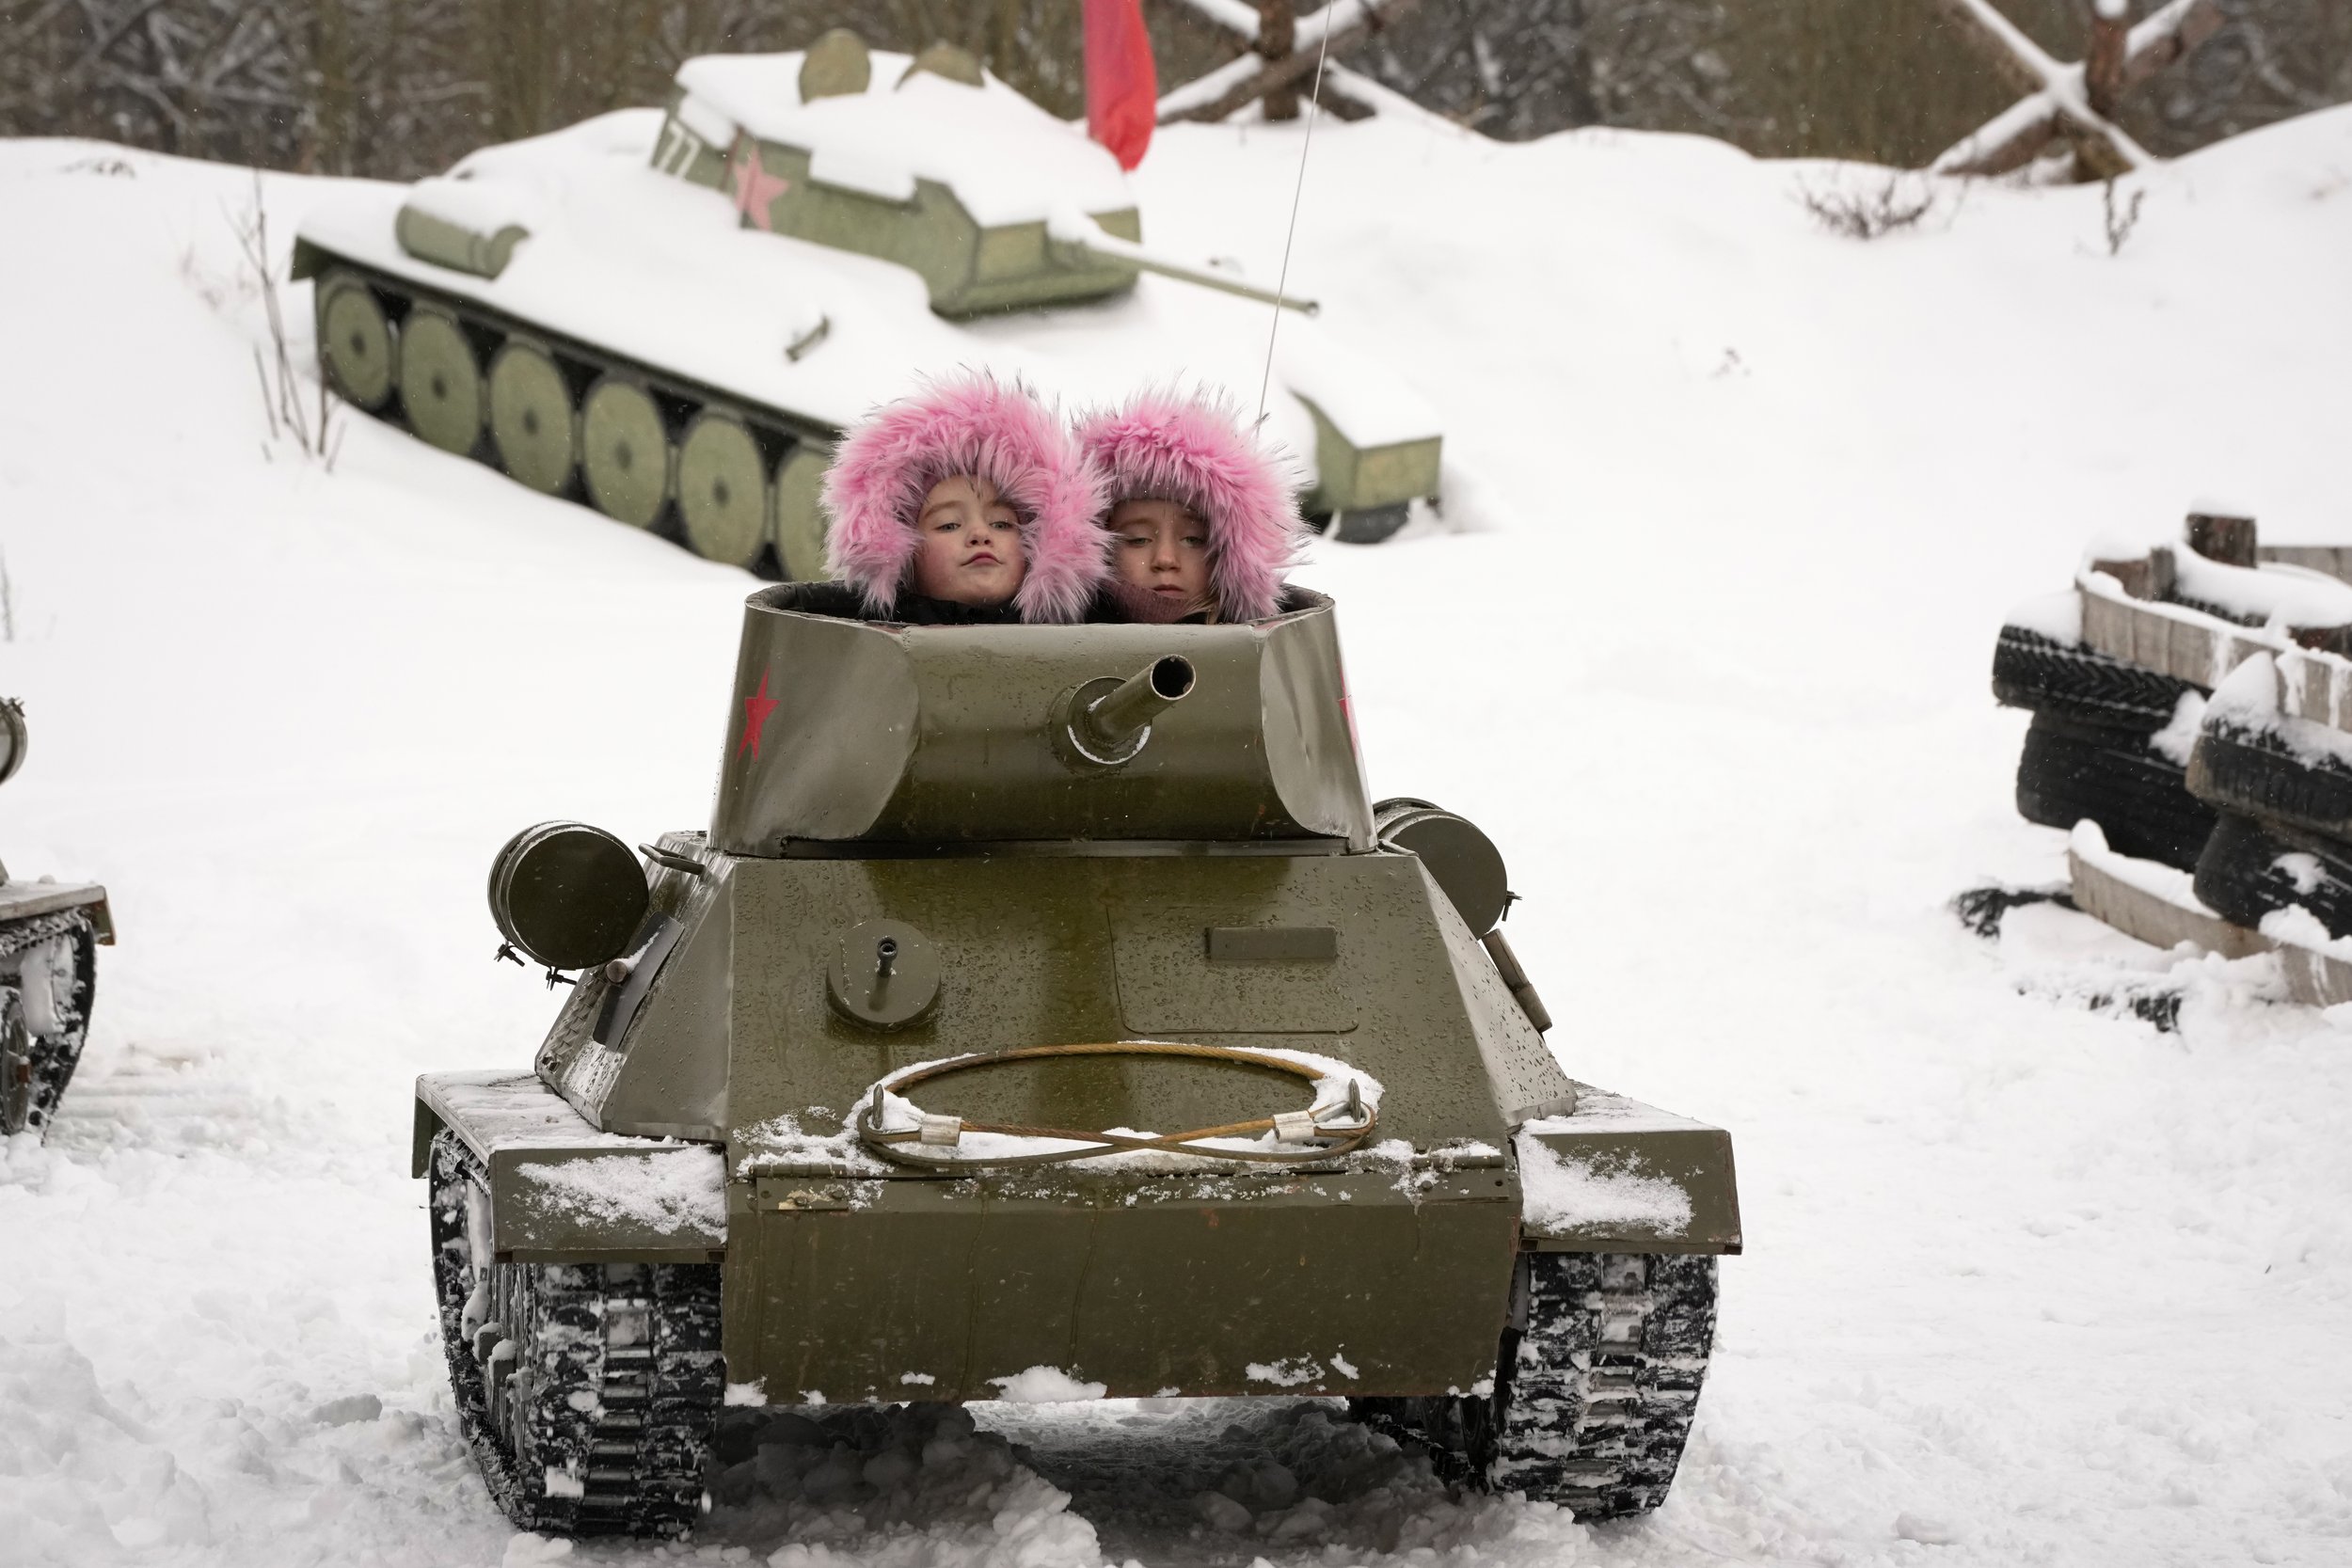  Children ride a model of World War II-era Soviet T-34 tank during a military historical festival at the family historical tank park outside St. Petersburg, Russia, on Feb. 4, 2023. (AP Photo/Dmitri Lovetsky) 